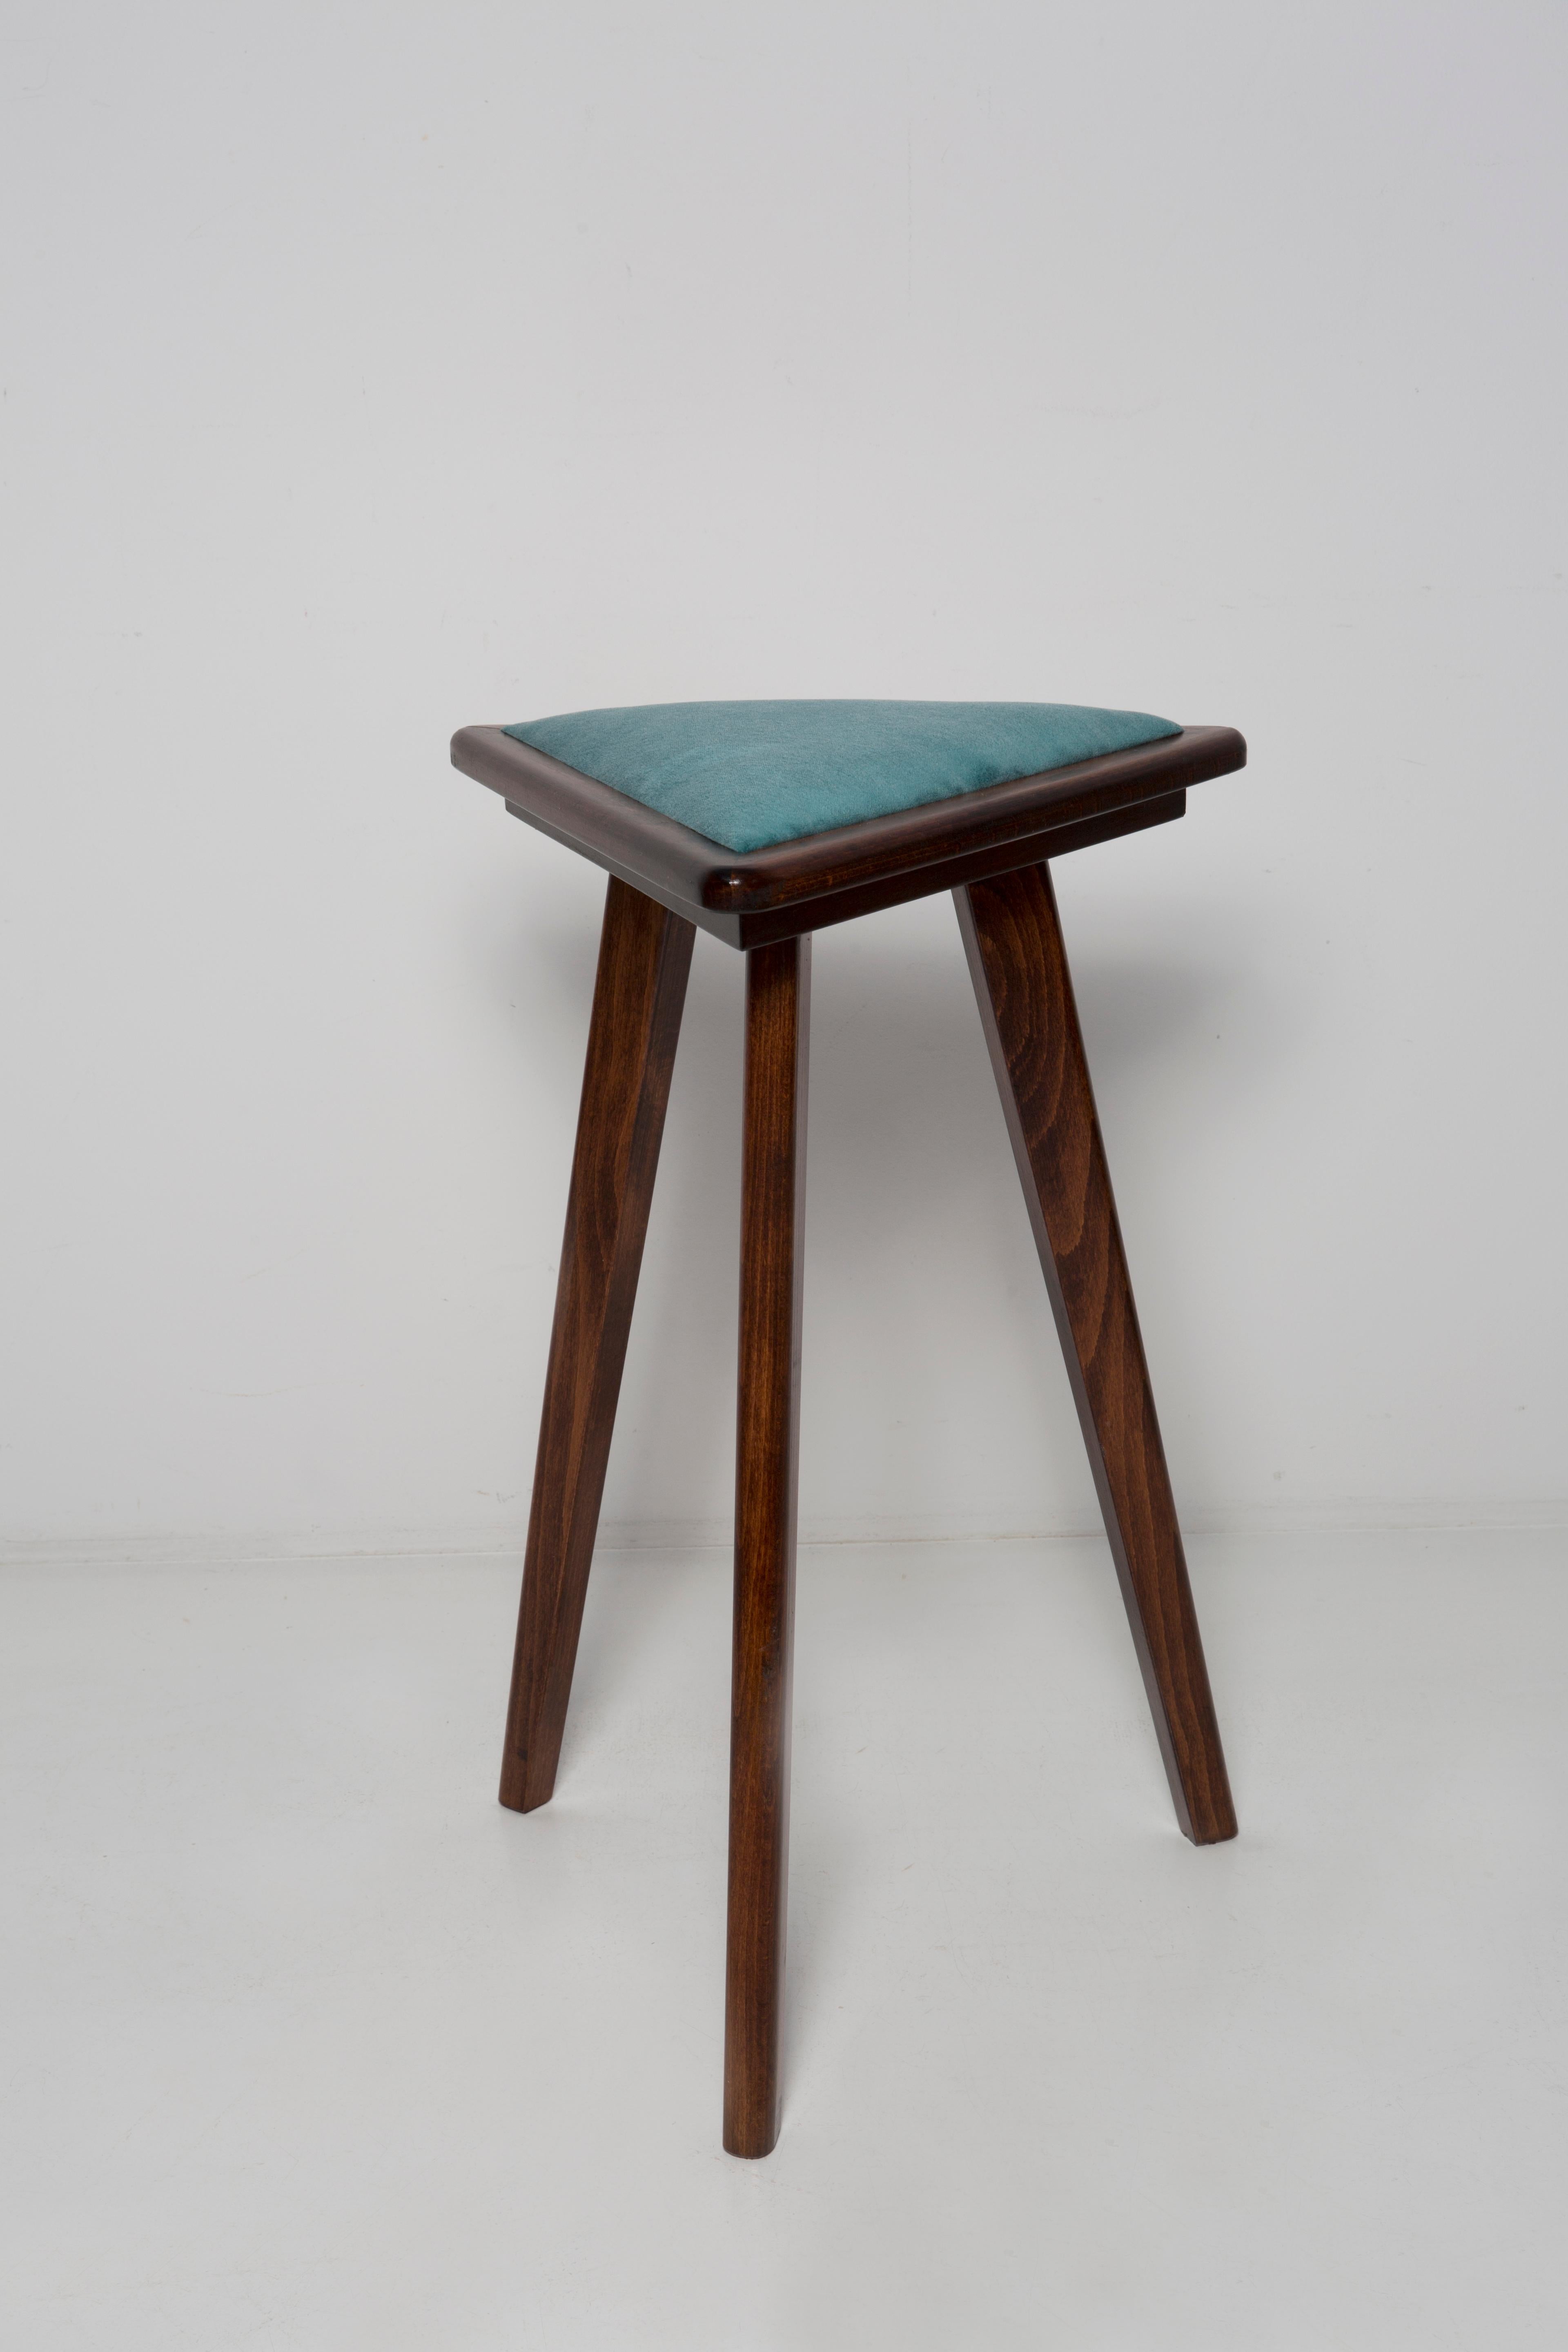 Hand-Crafted Two Mid-Century Style Acqua Velvet Triangle Medium Stools, by Vintola, Poland For Sale